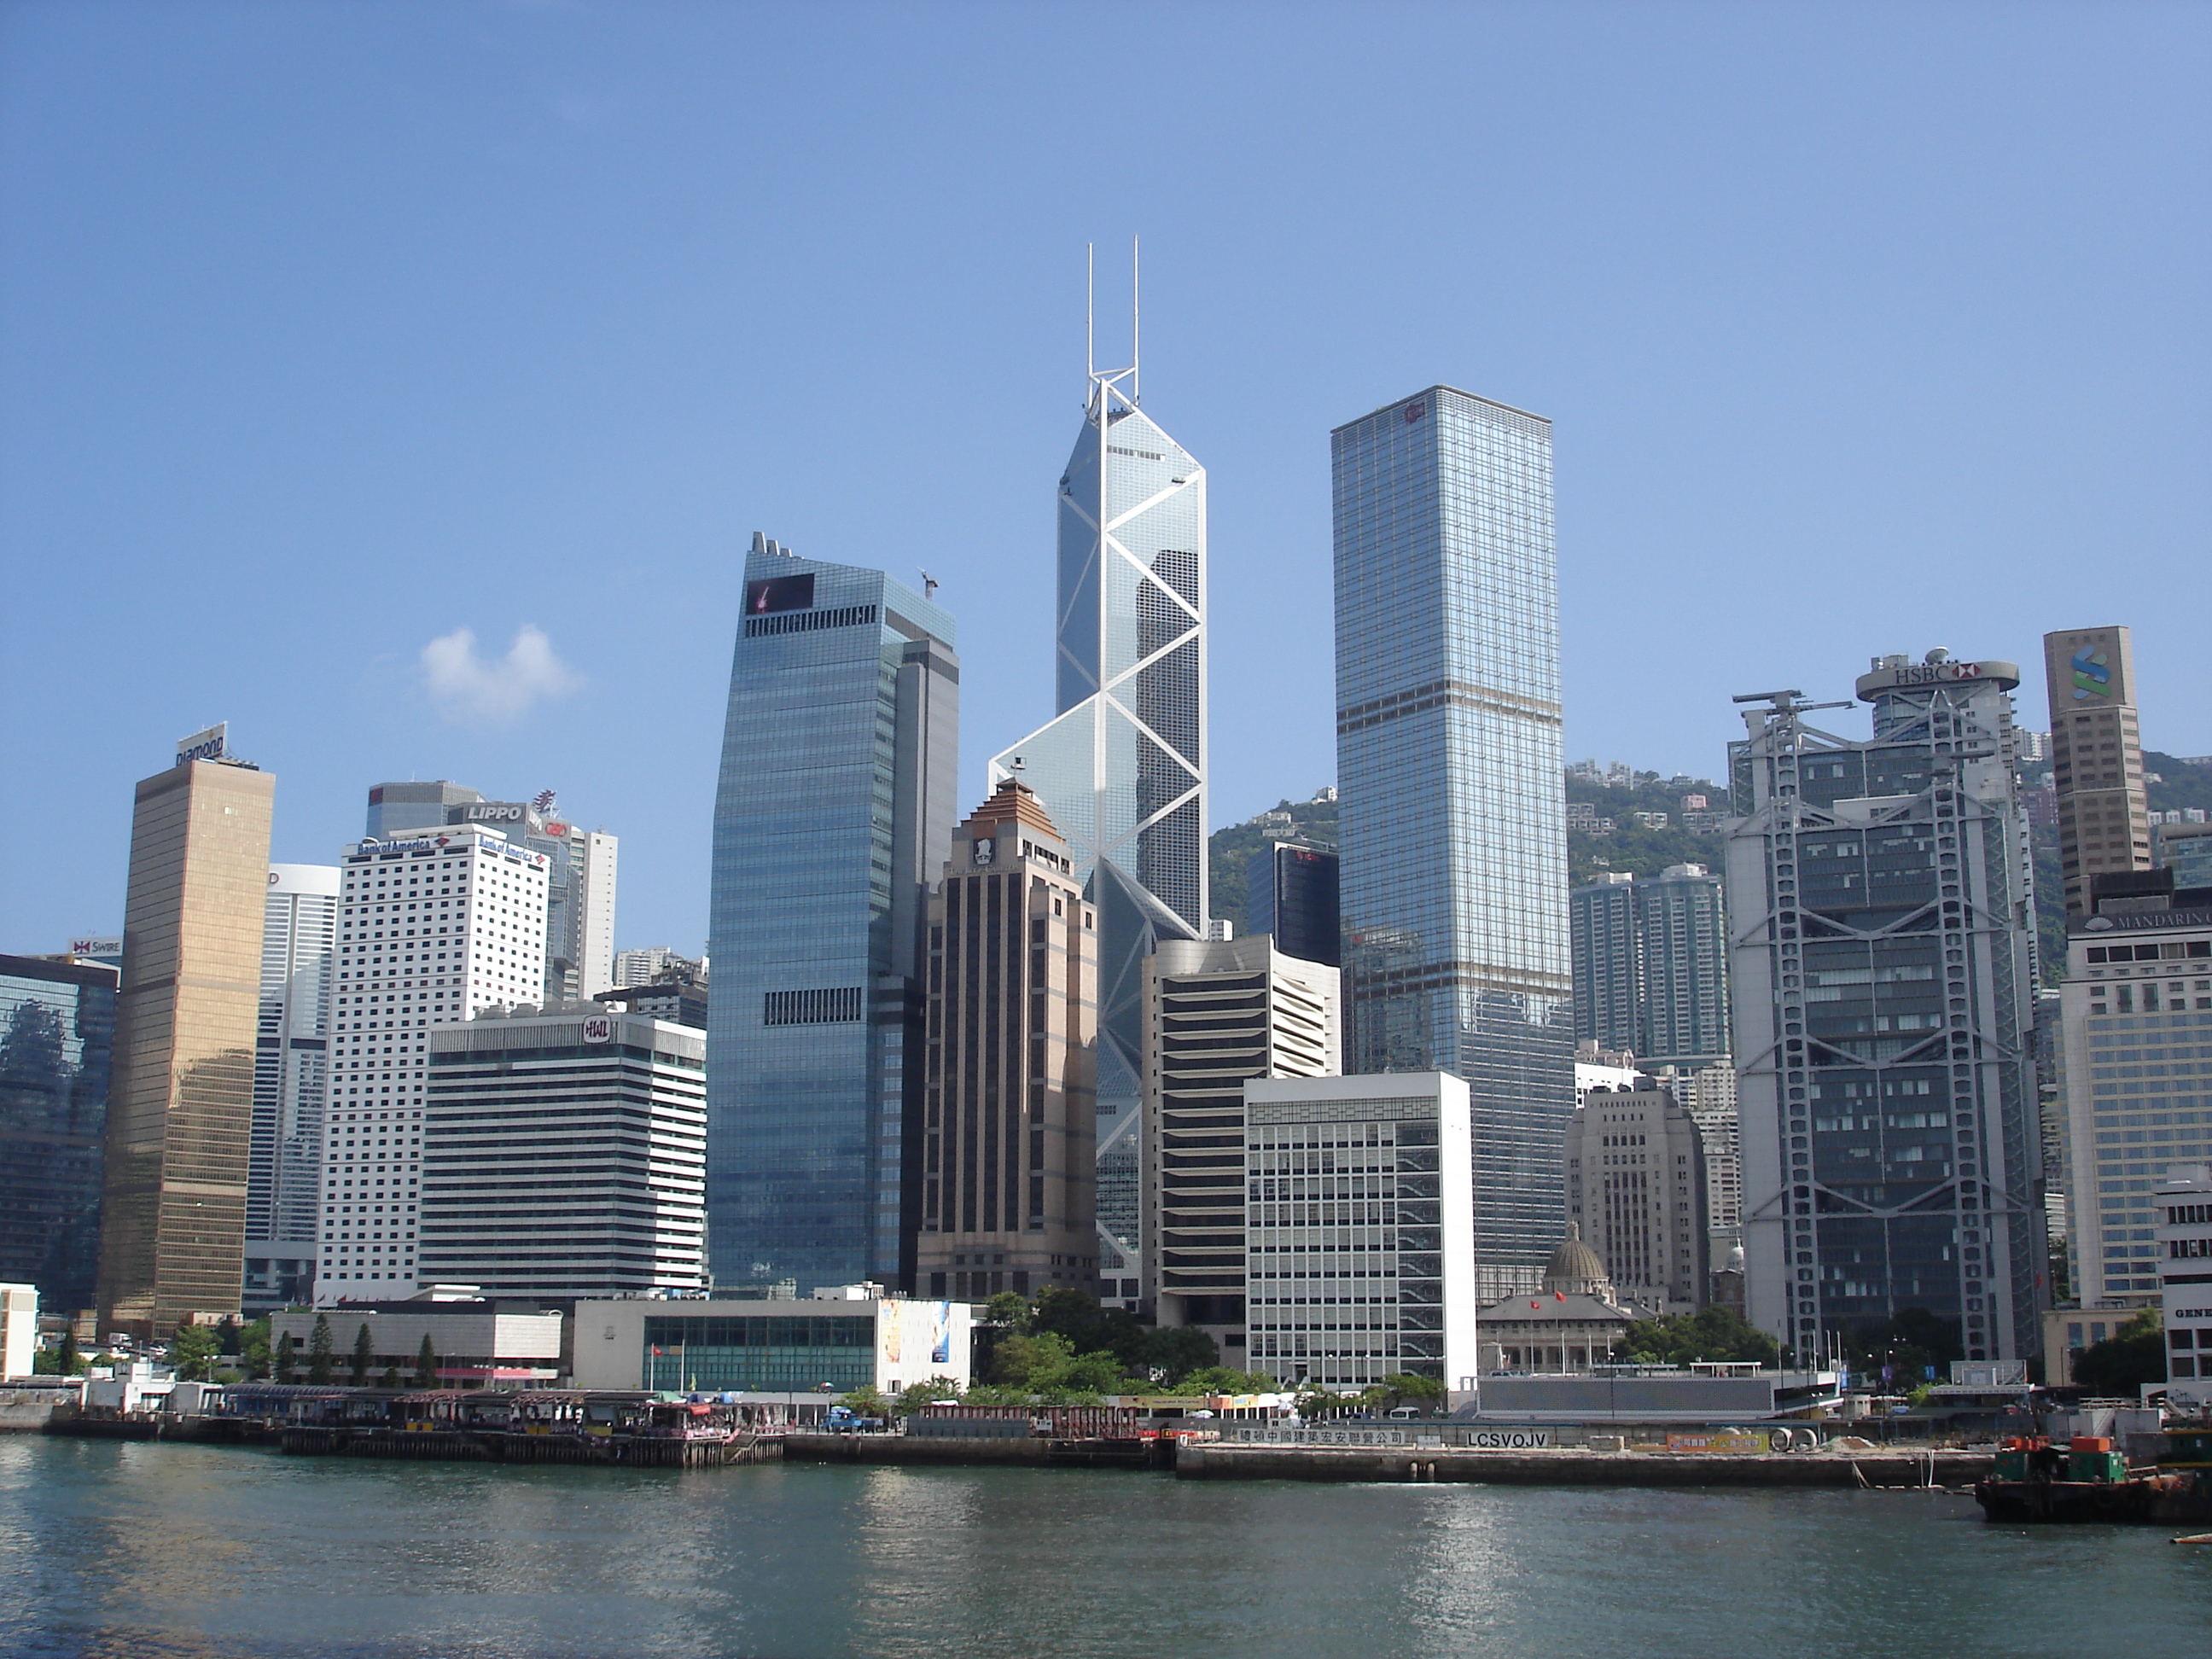 Hong Kong skyscrapers fromt he sea